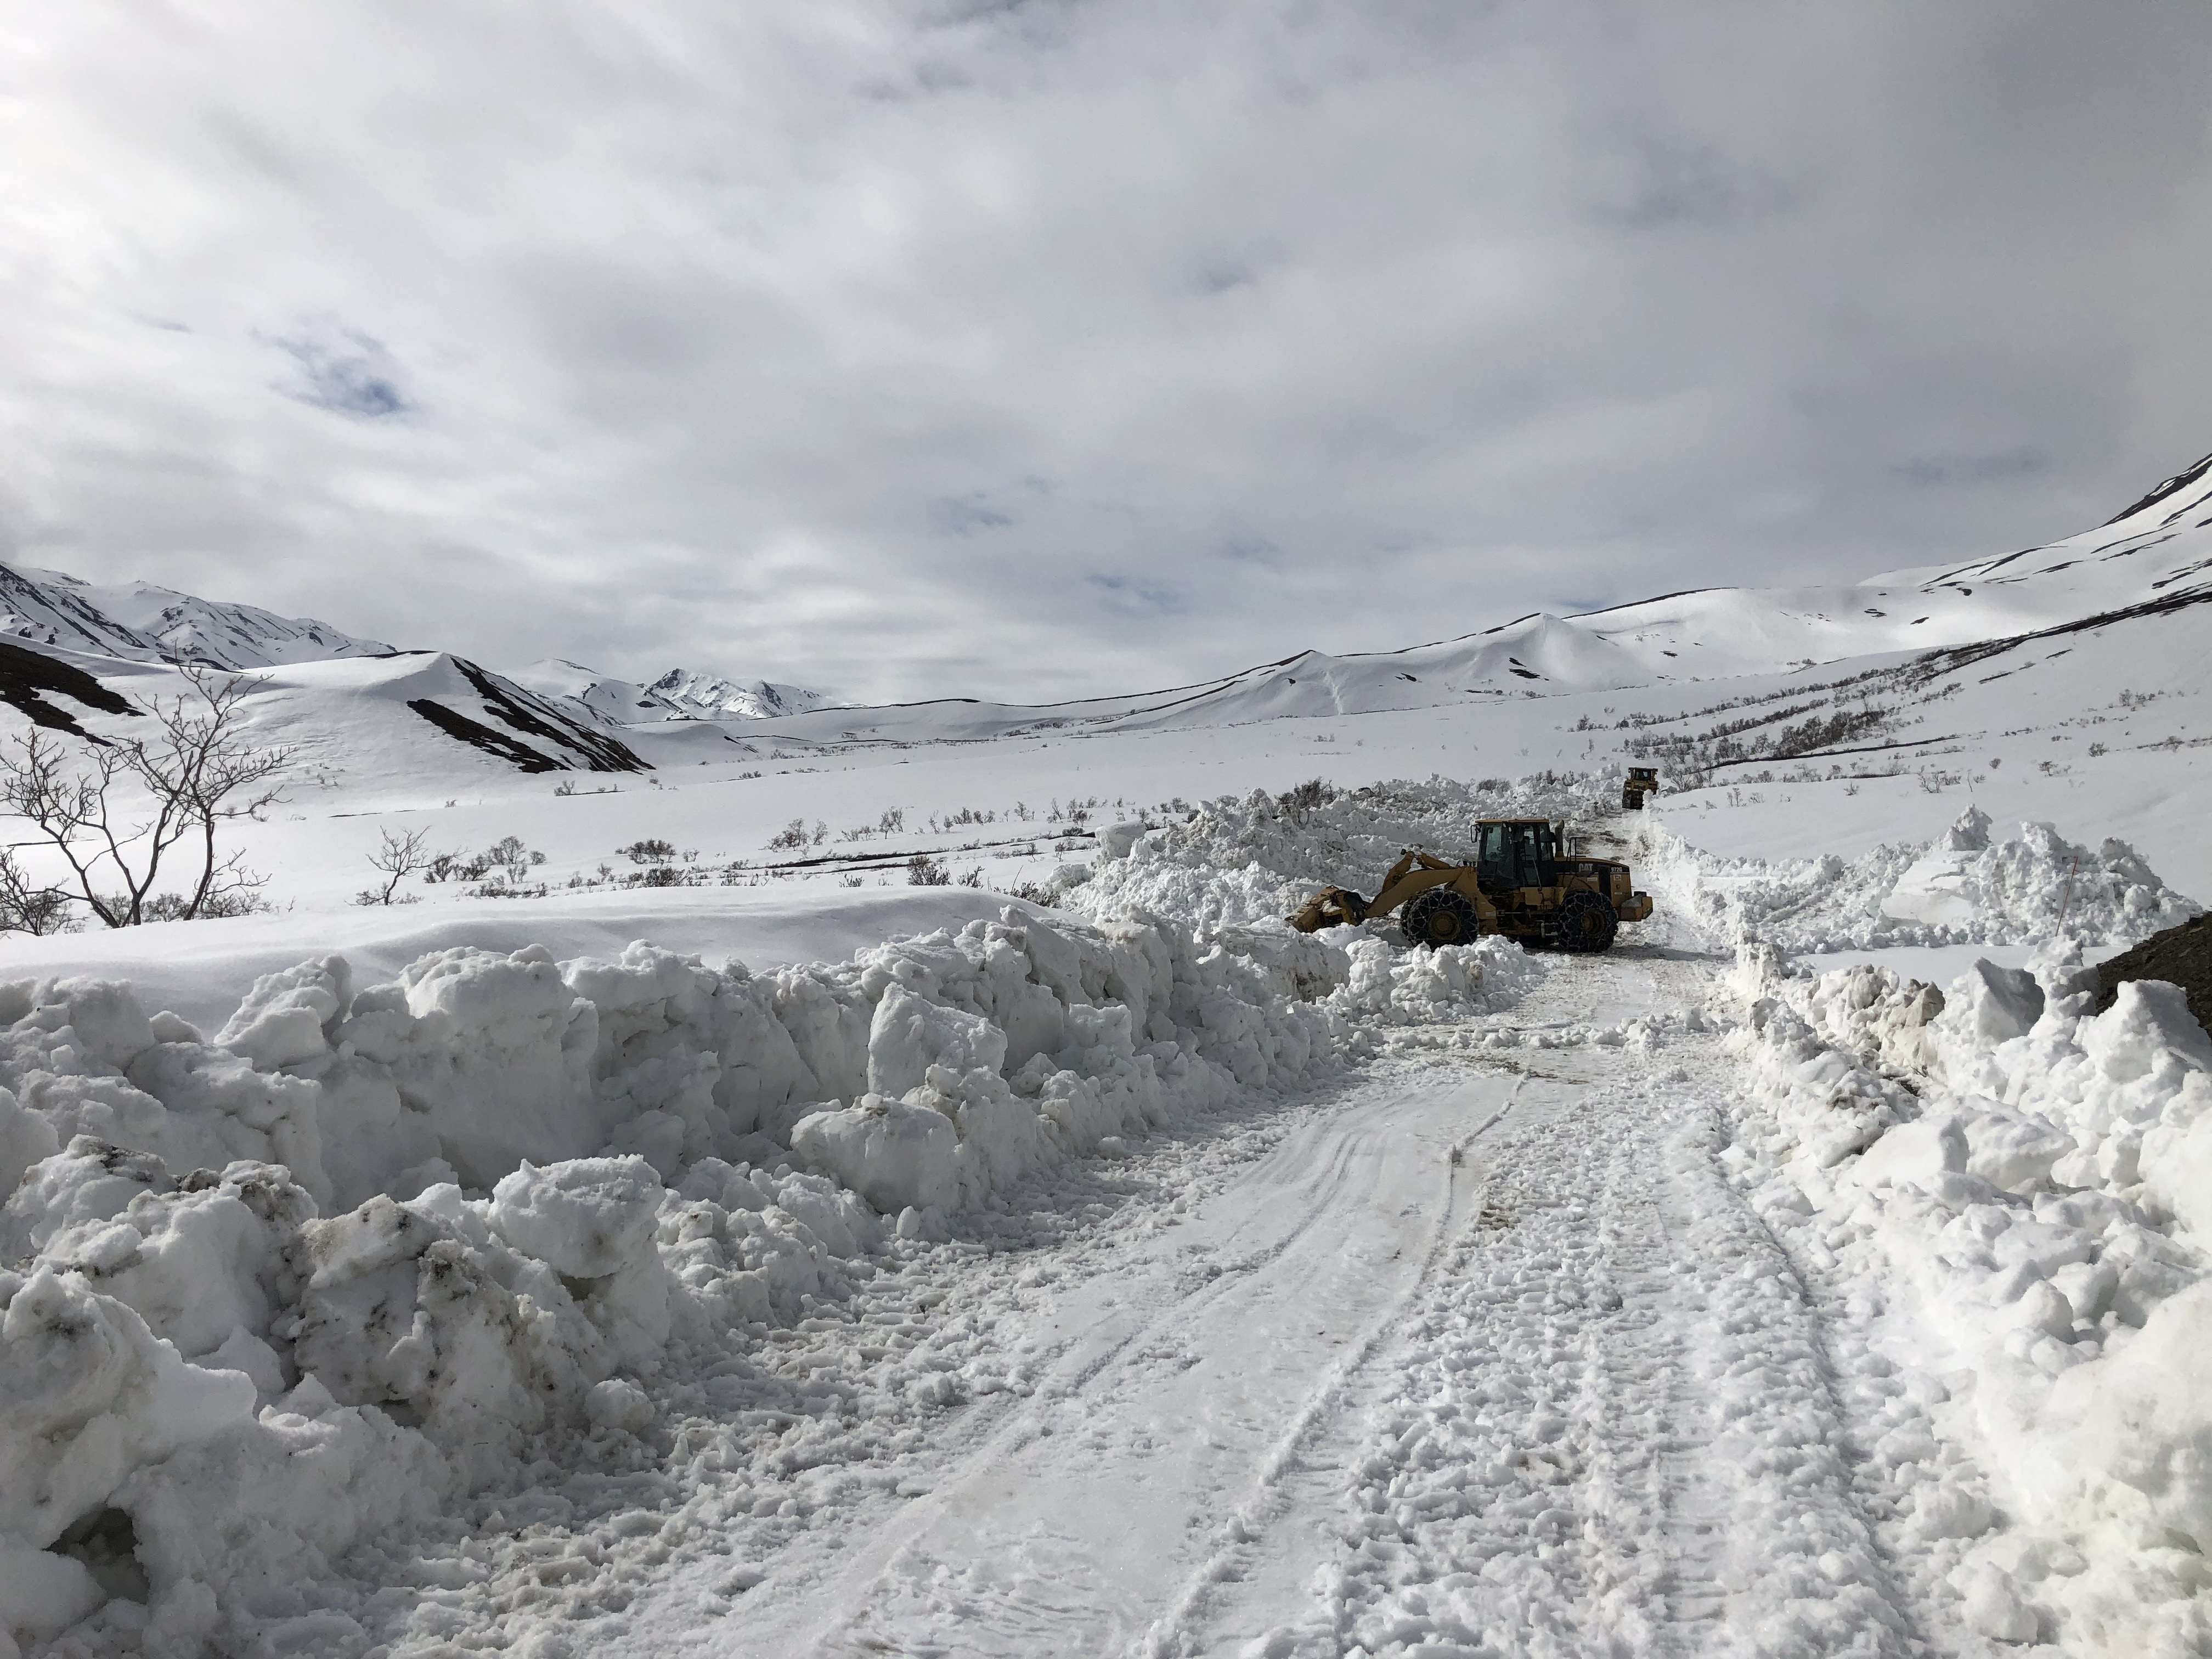 a front end loader plowing a path through a snowy landscape